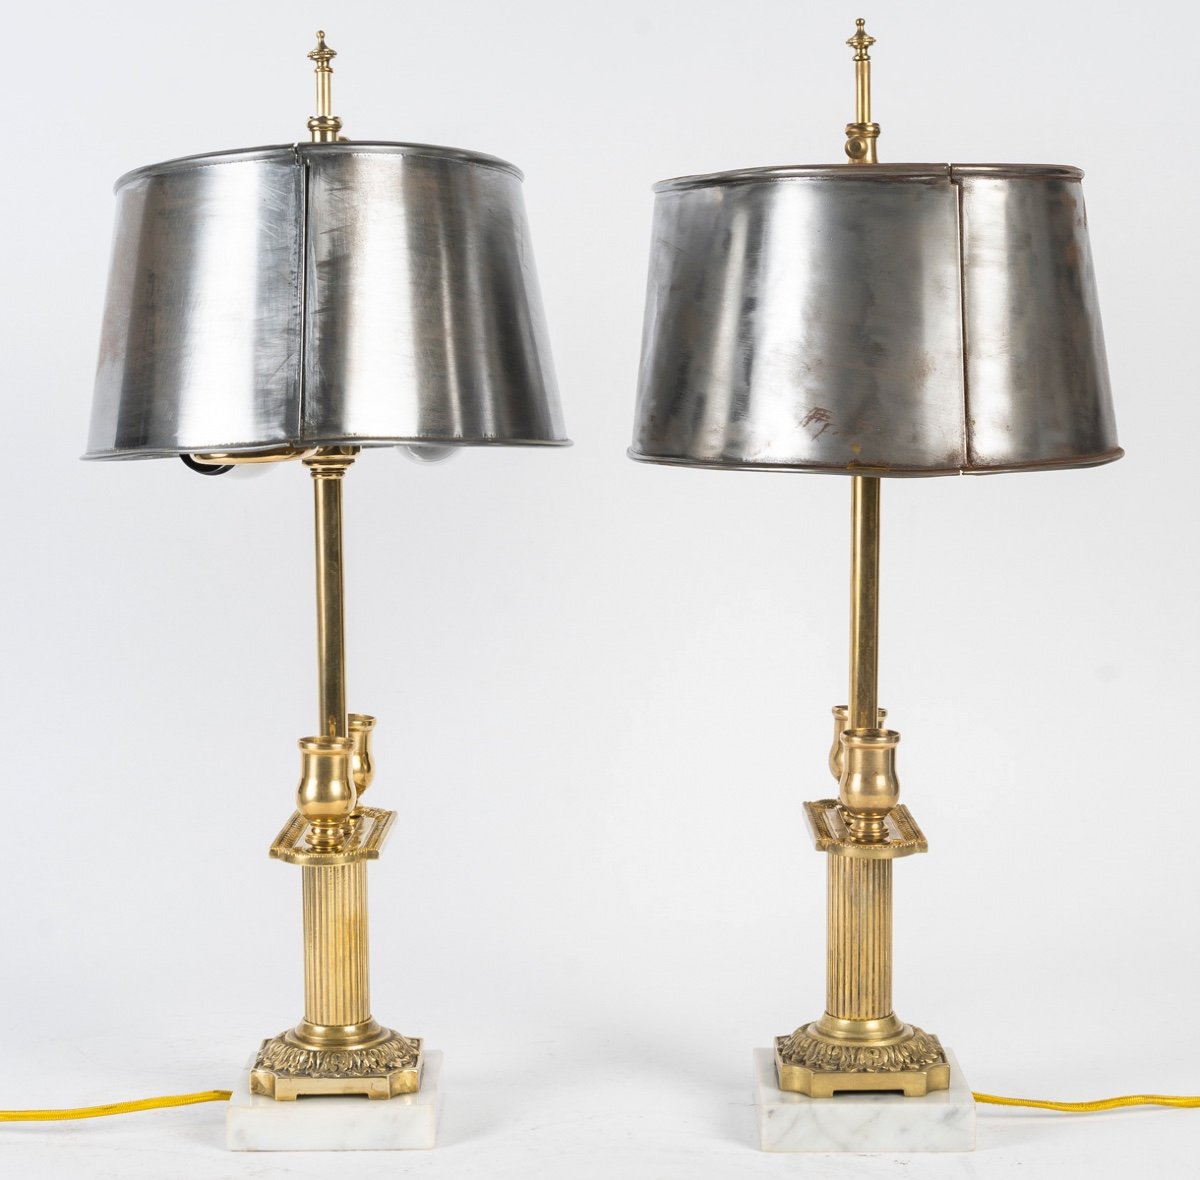 Pair Of Candlesticks Mounted As Table Lamps, 19th Century, Napoleon III Period.-photo-4